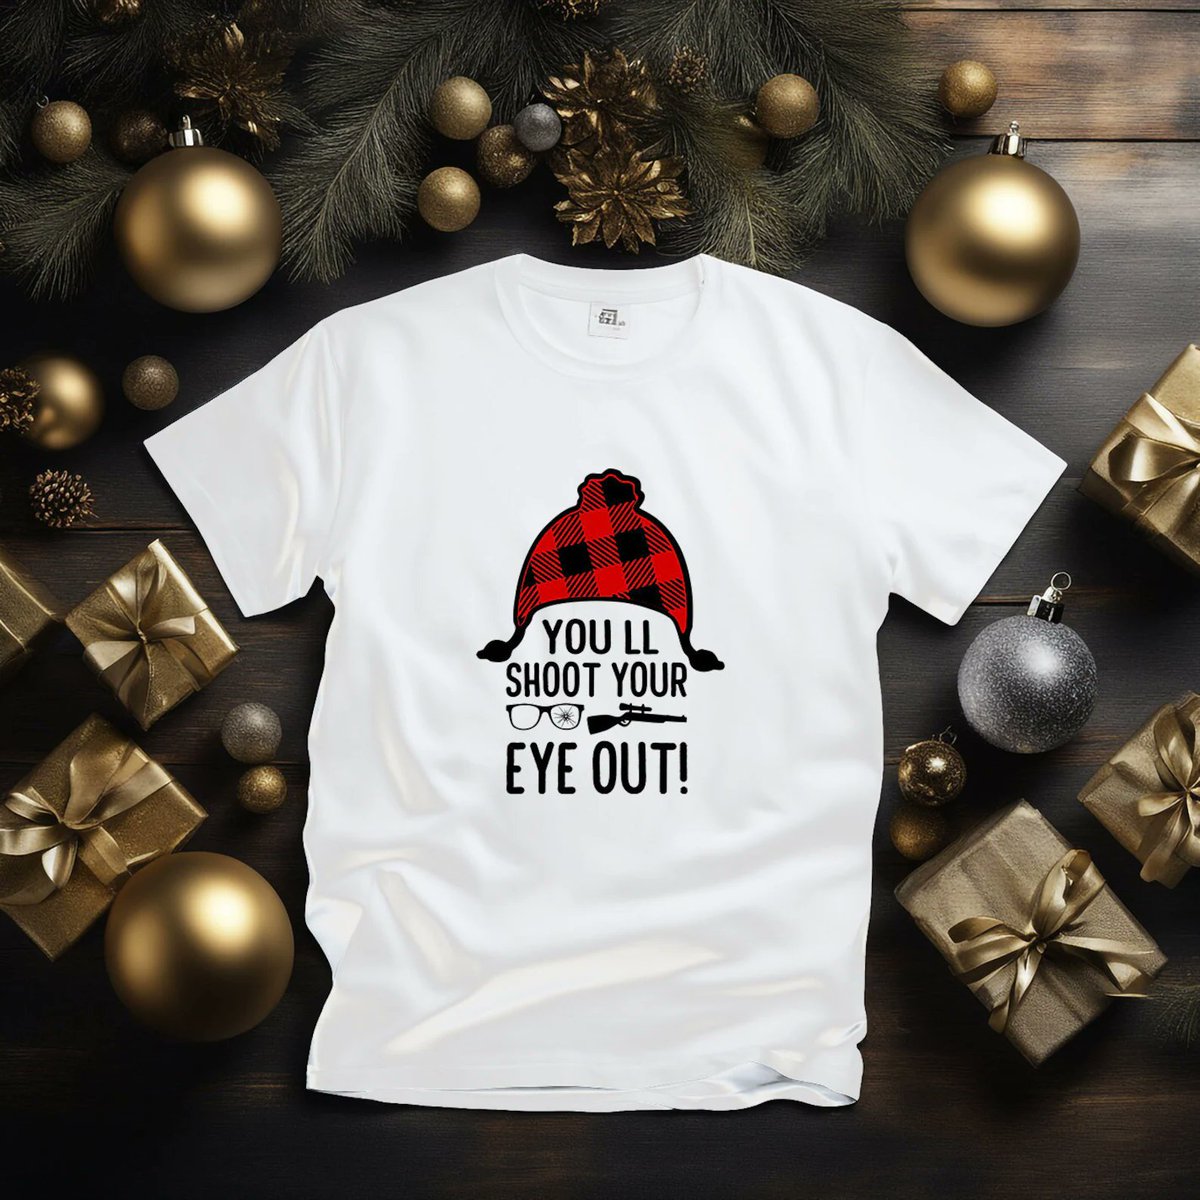 Embrace the festive season with style! 🎄 Our White Christmas Woman's Holiday Shirt is the perfect addition to your winter wardrobe. #HolidayFashion #ChristmasStyle #EtsyFashion'

Burna Taylor Swift Jim Carrey Venom

Check it out zeep.ly/wqPCZ